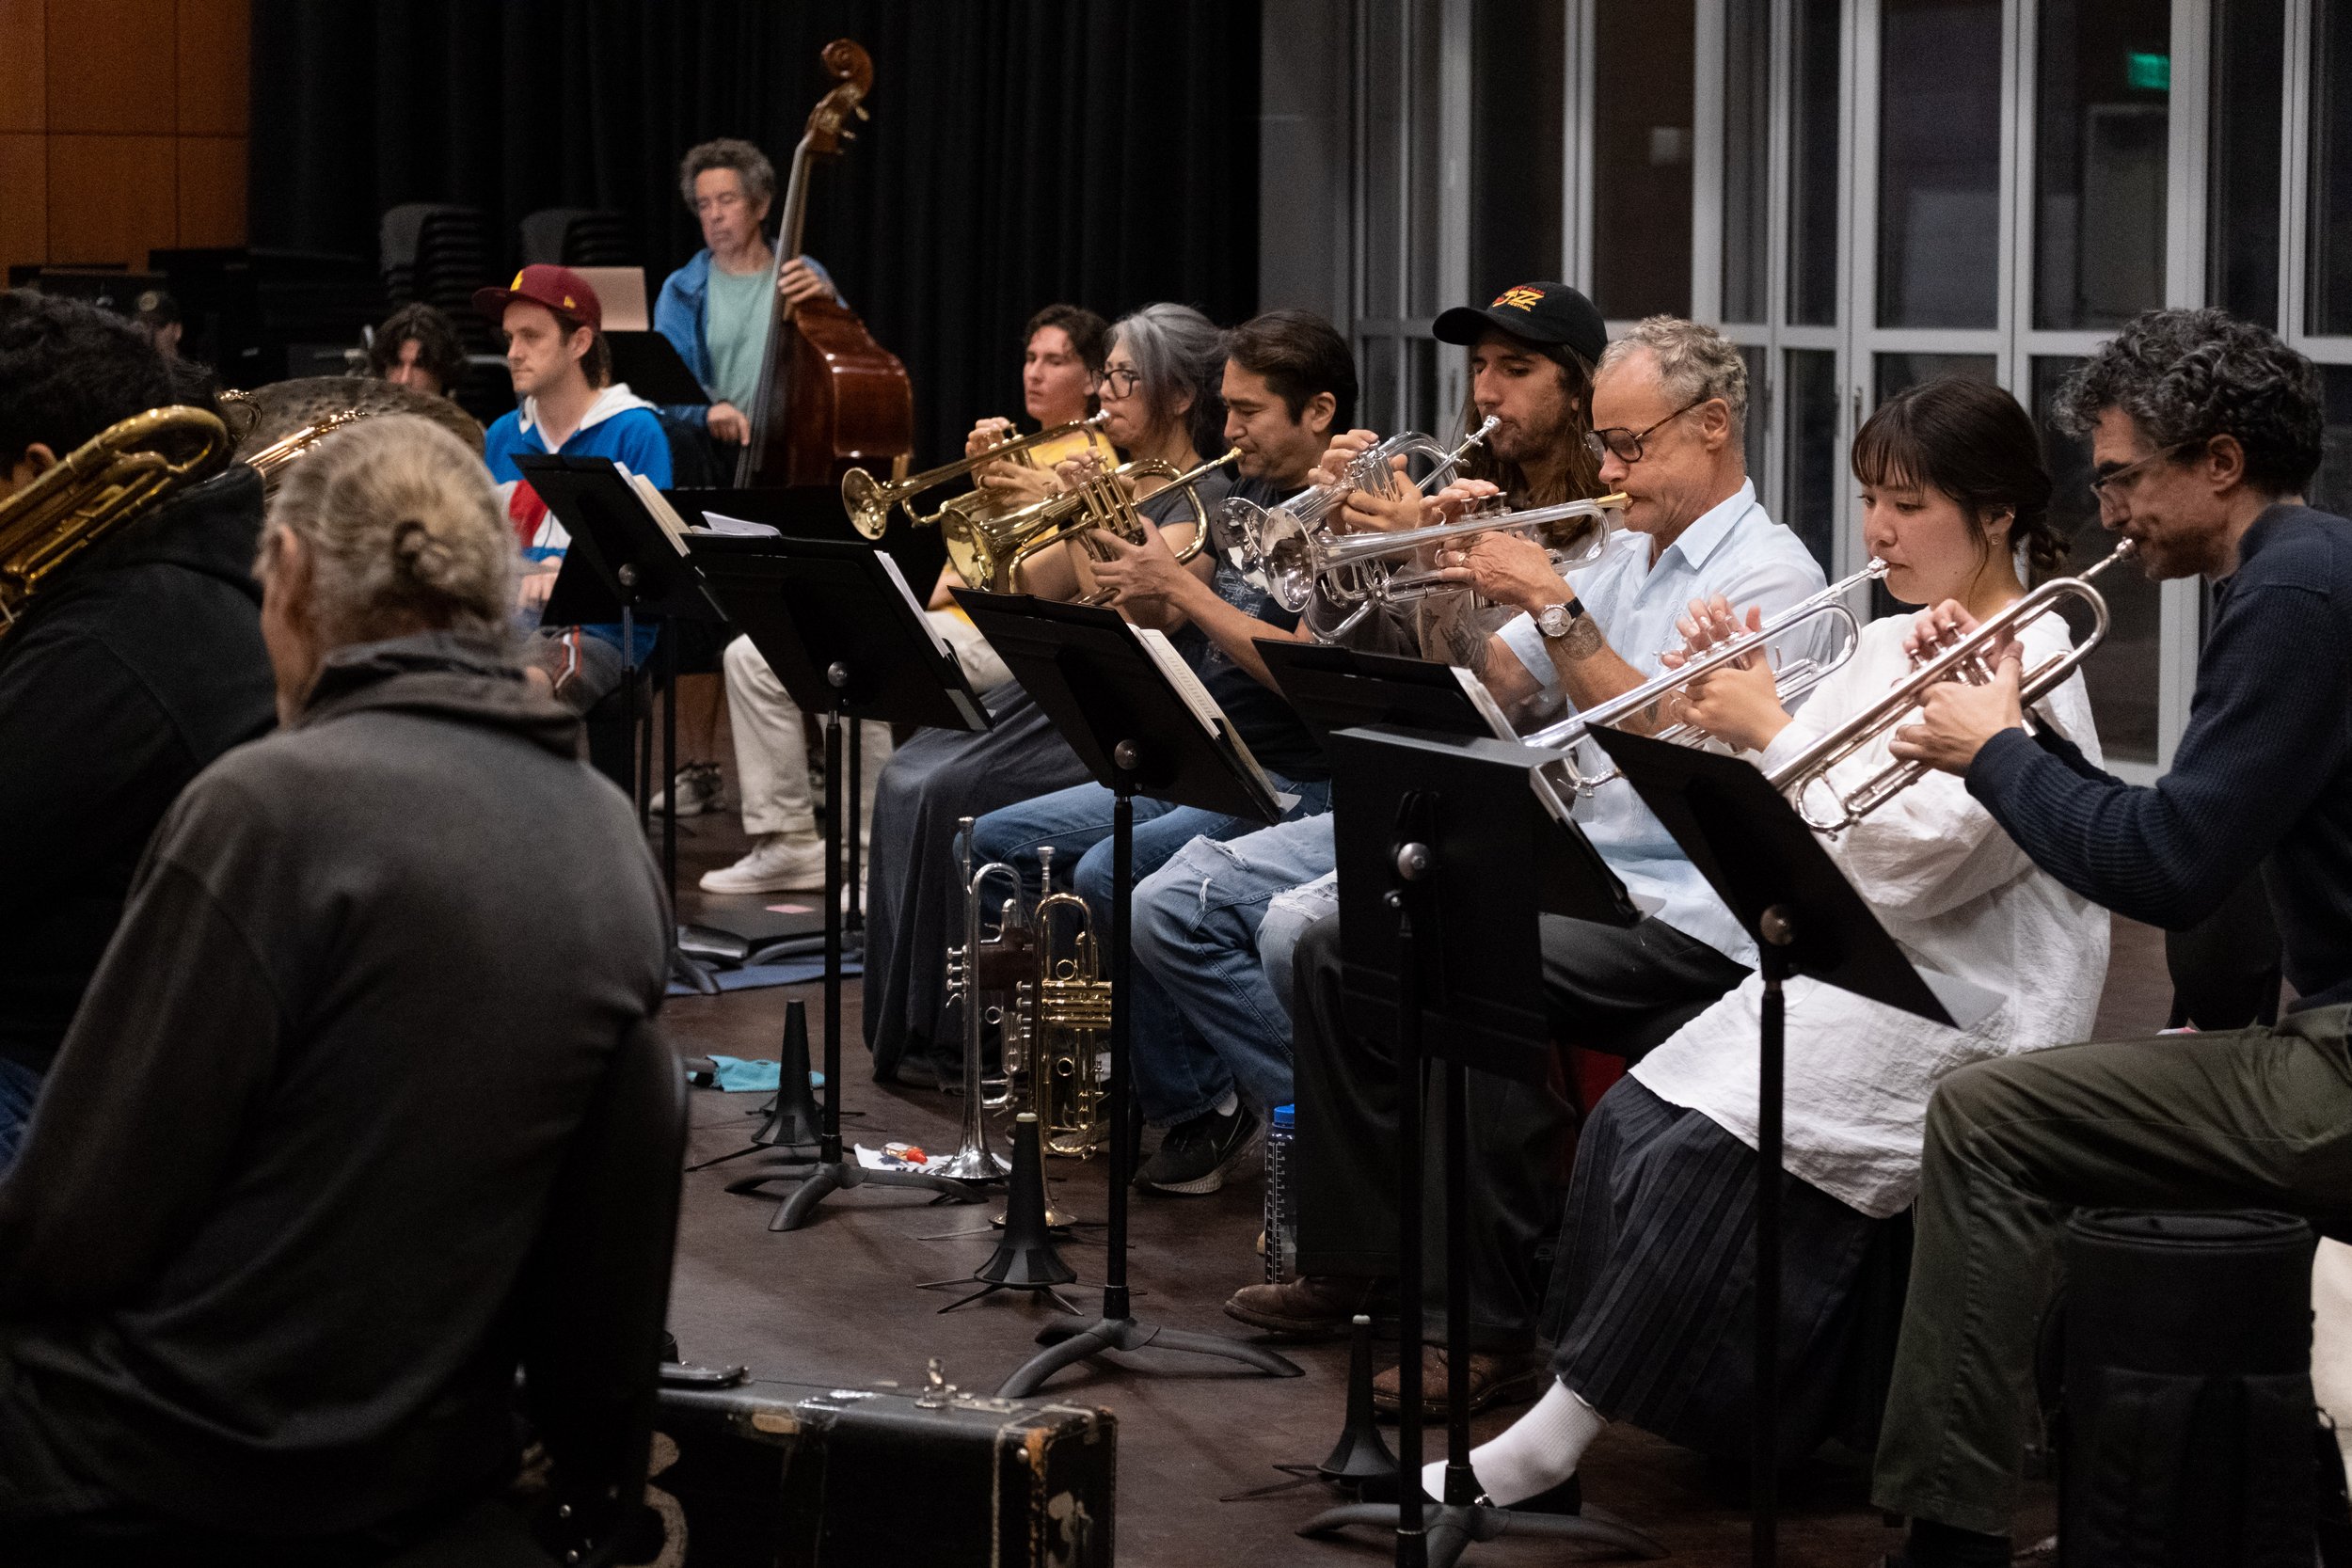  The trumpet section of the Santa Monica College (SMC) Jazz Ensemble includes founding member of the rock band Red Hot Chili Peppers, seated third from the right as they rehearse on Monday, Sept. 18th, 2023 at the SMC Performing Arts Complex in Santa